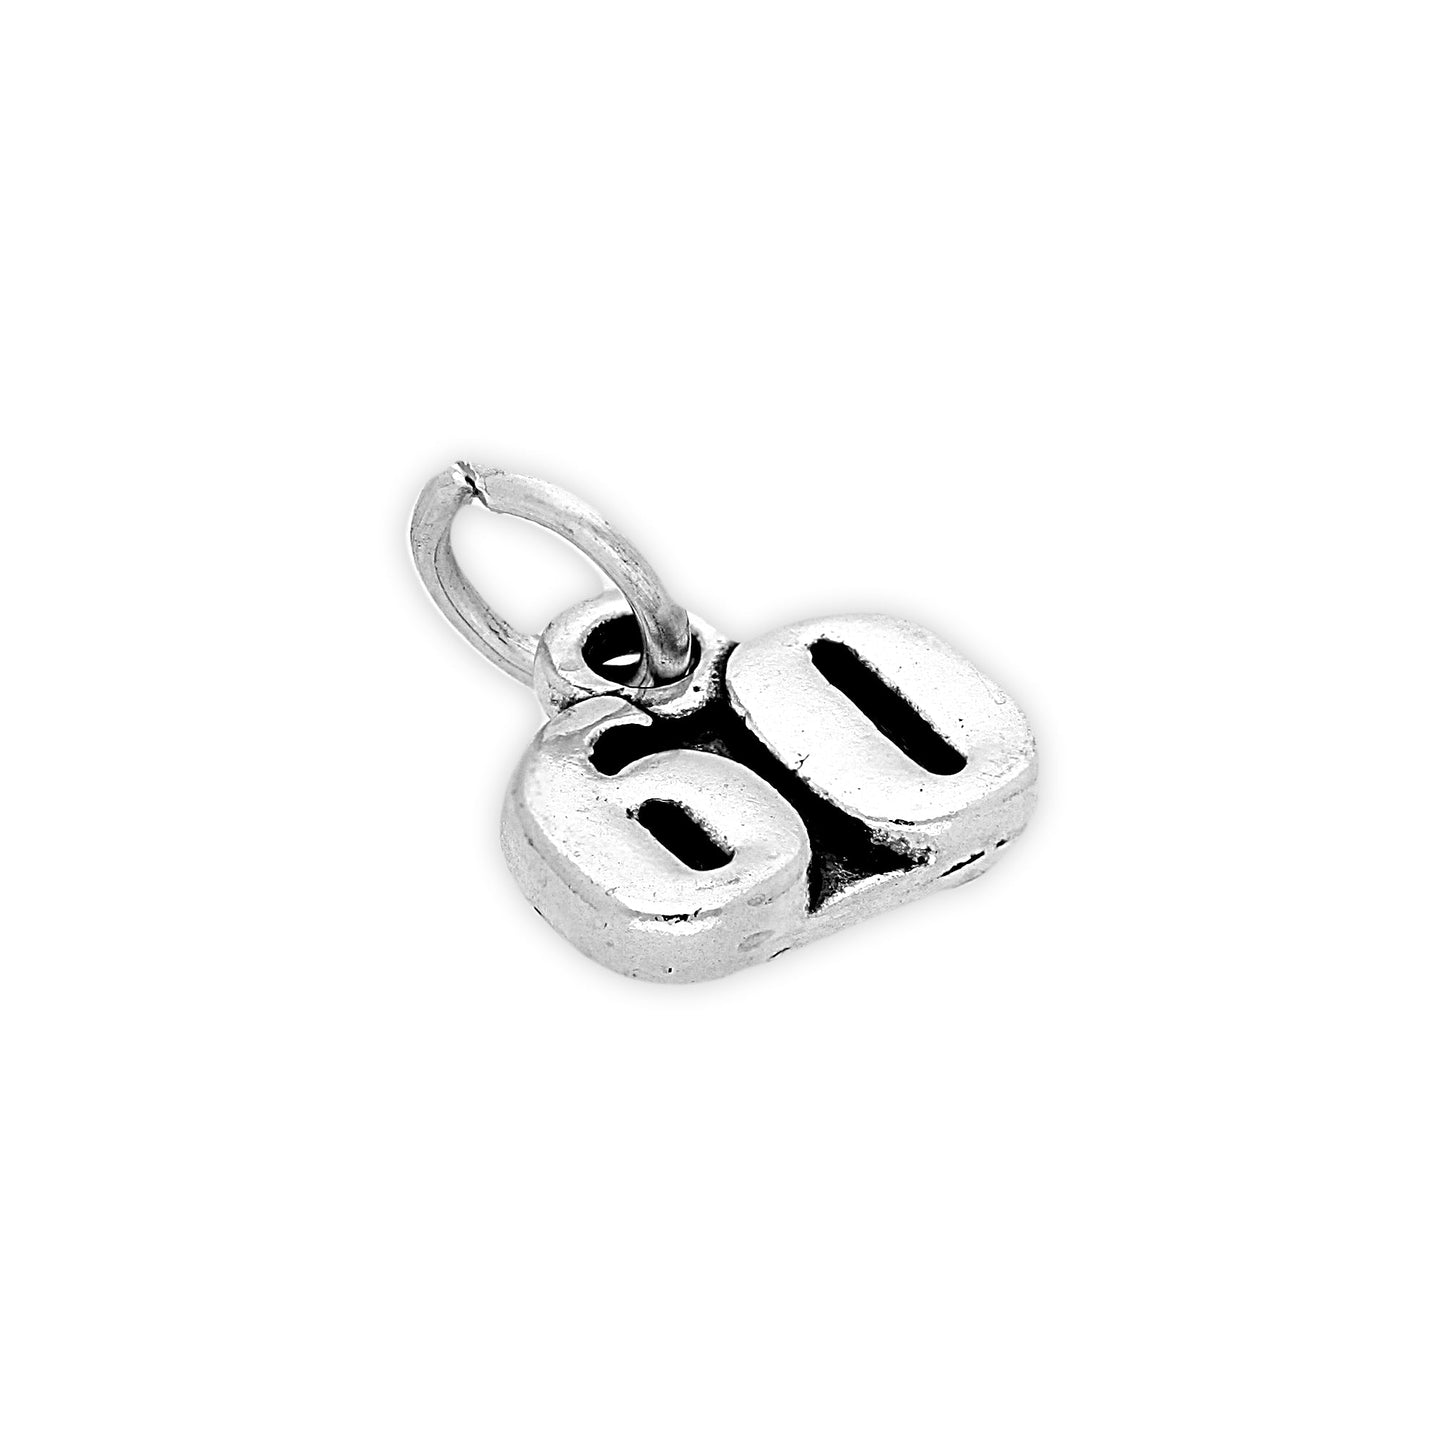 Sterling Silver Birthday Number Charms 20th - 60th